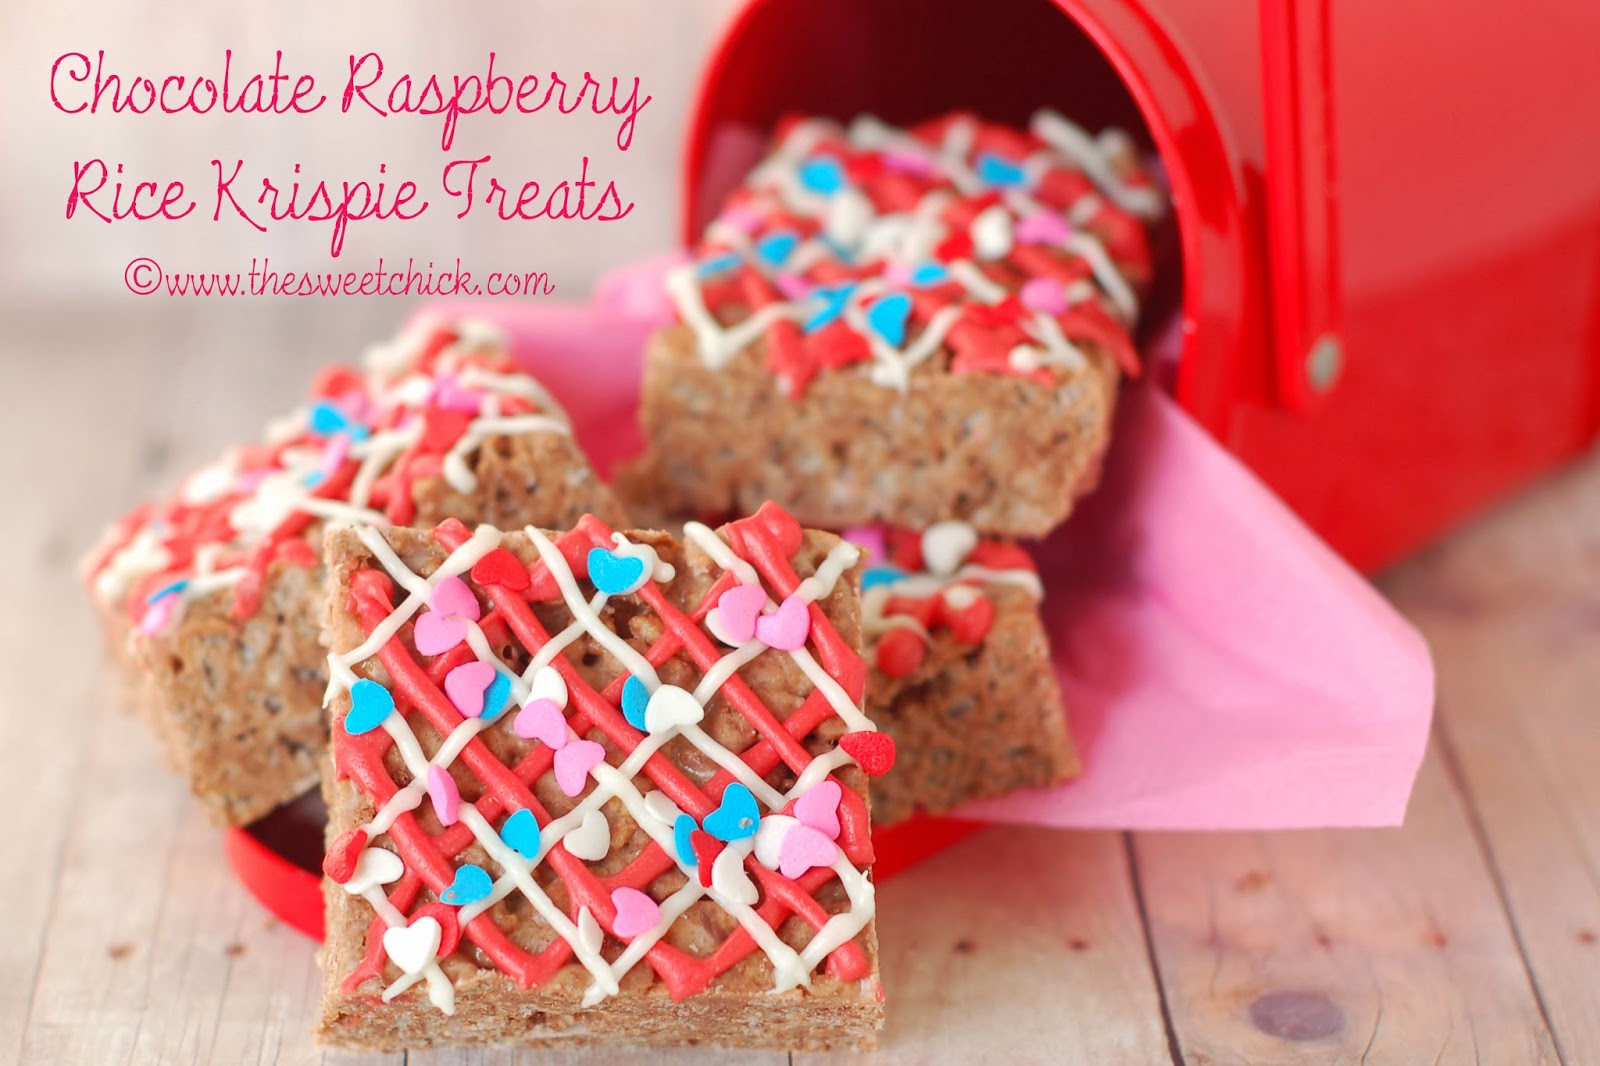 Chocolate Reaspberry Rice Krispie Treats by The Sweet Chick